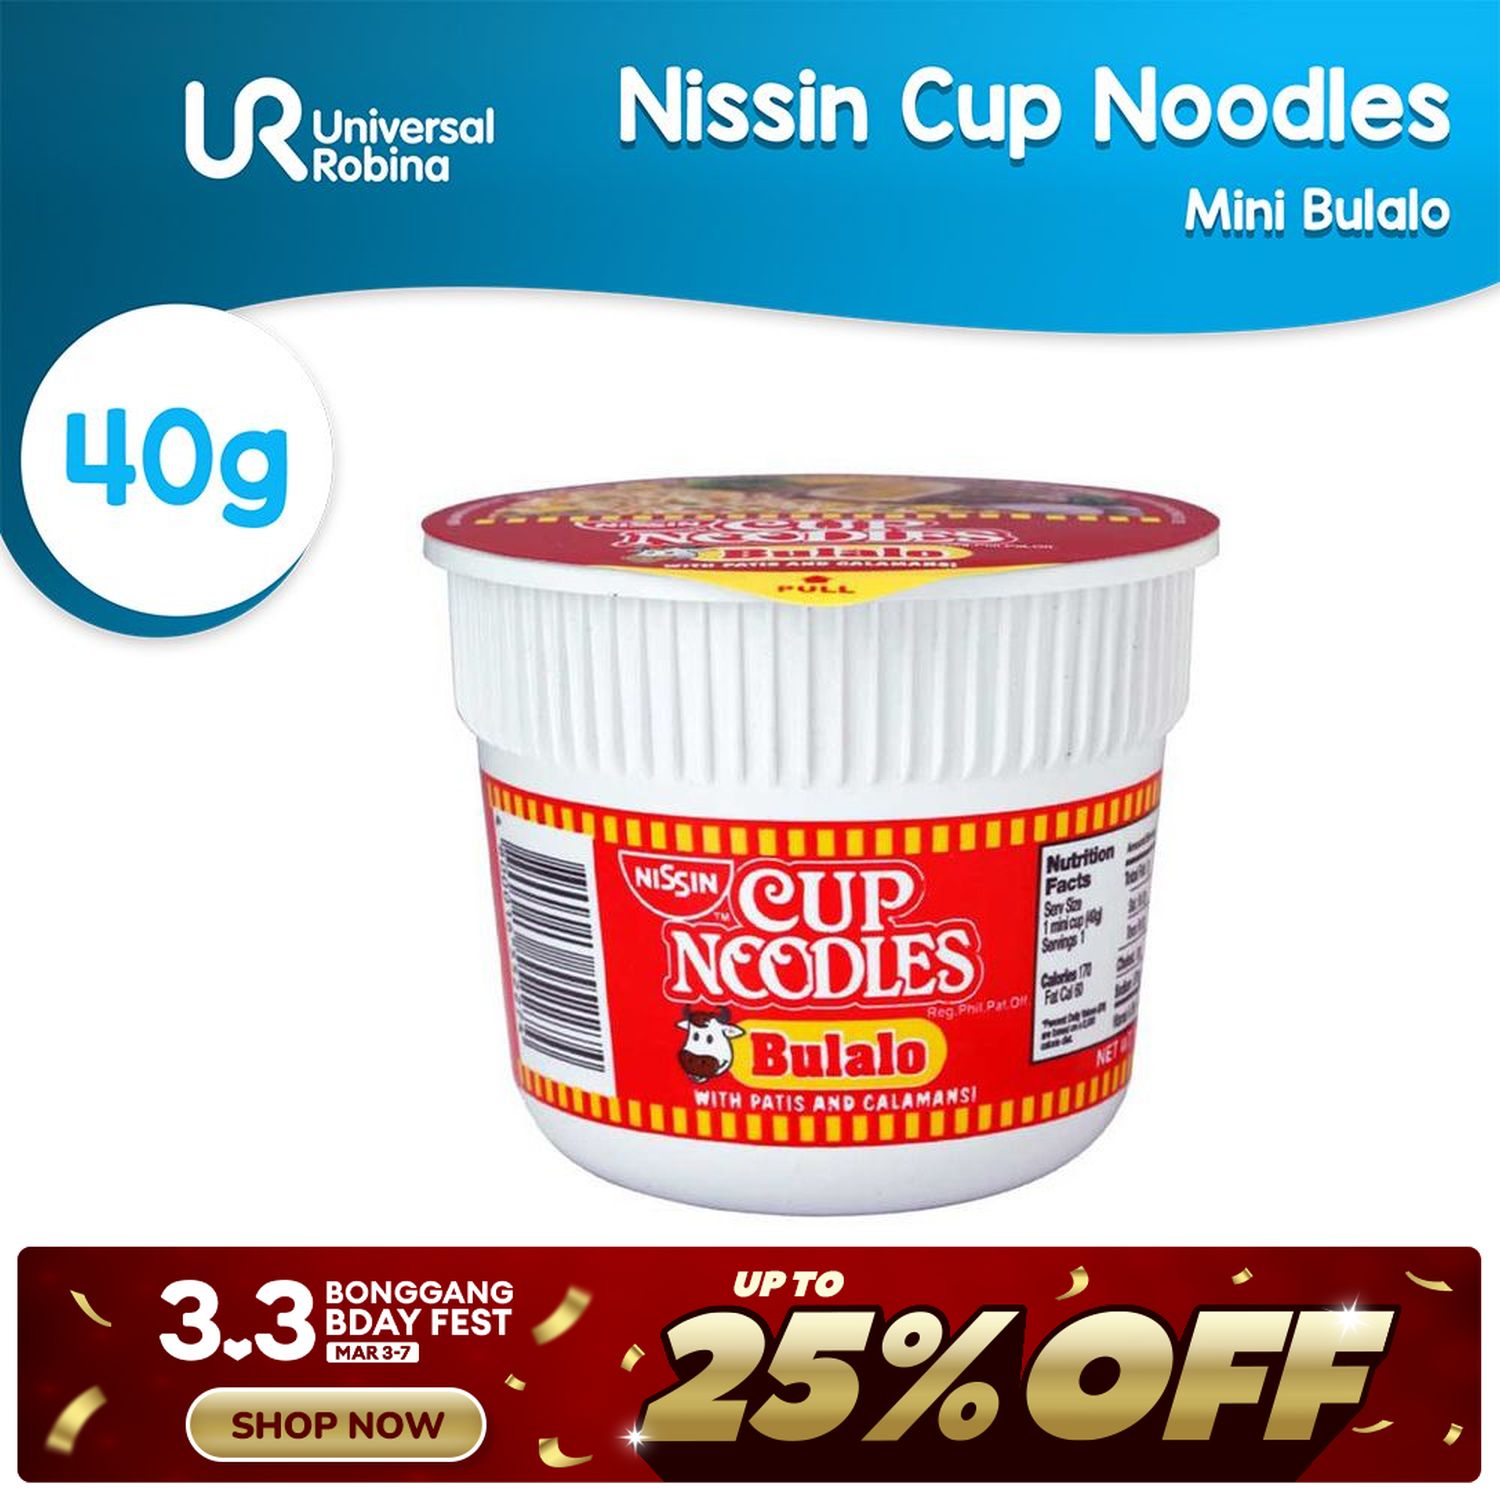 Buy Nissin Cup Noodles Mini Bulalo (40g) from Pandamart - Davao East online  on foodpanda